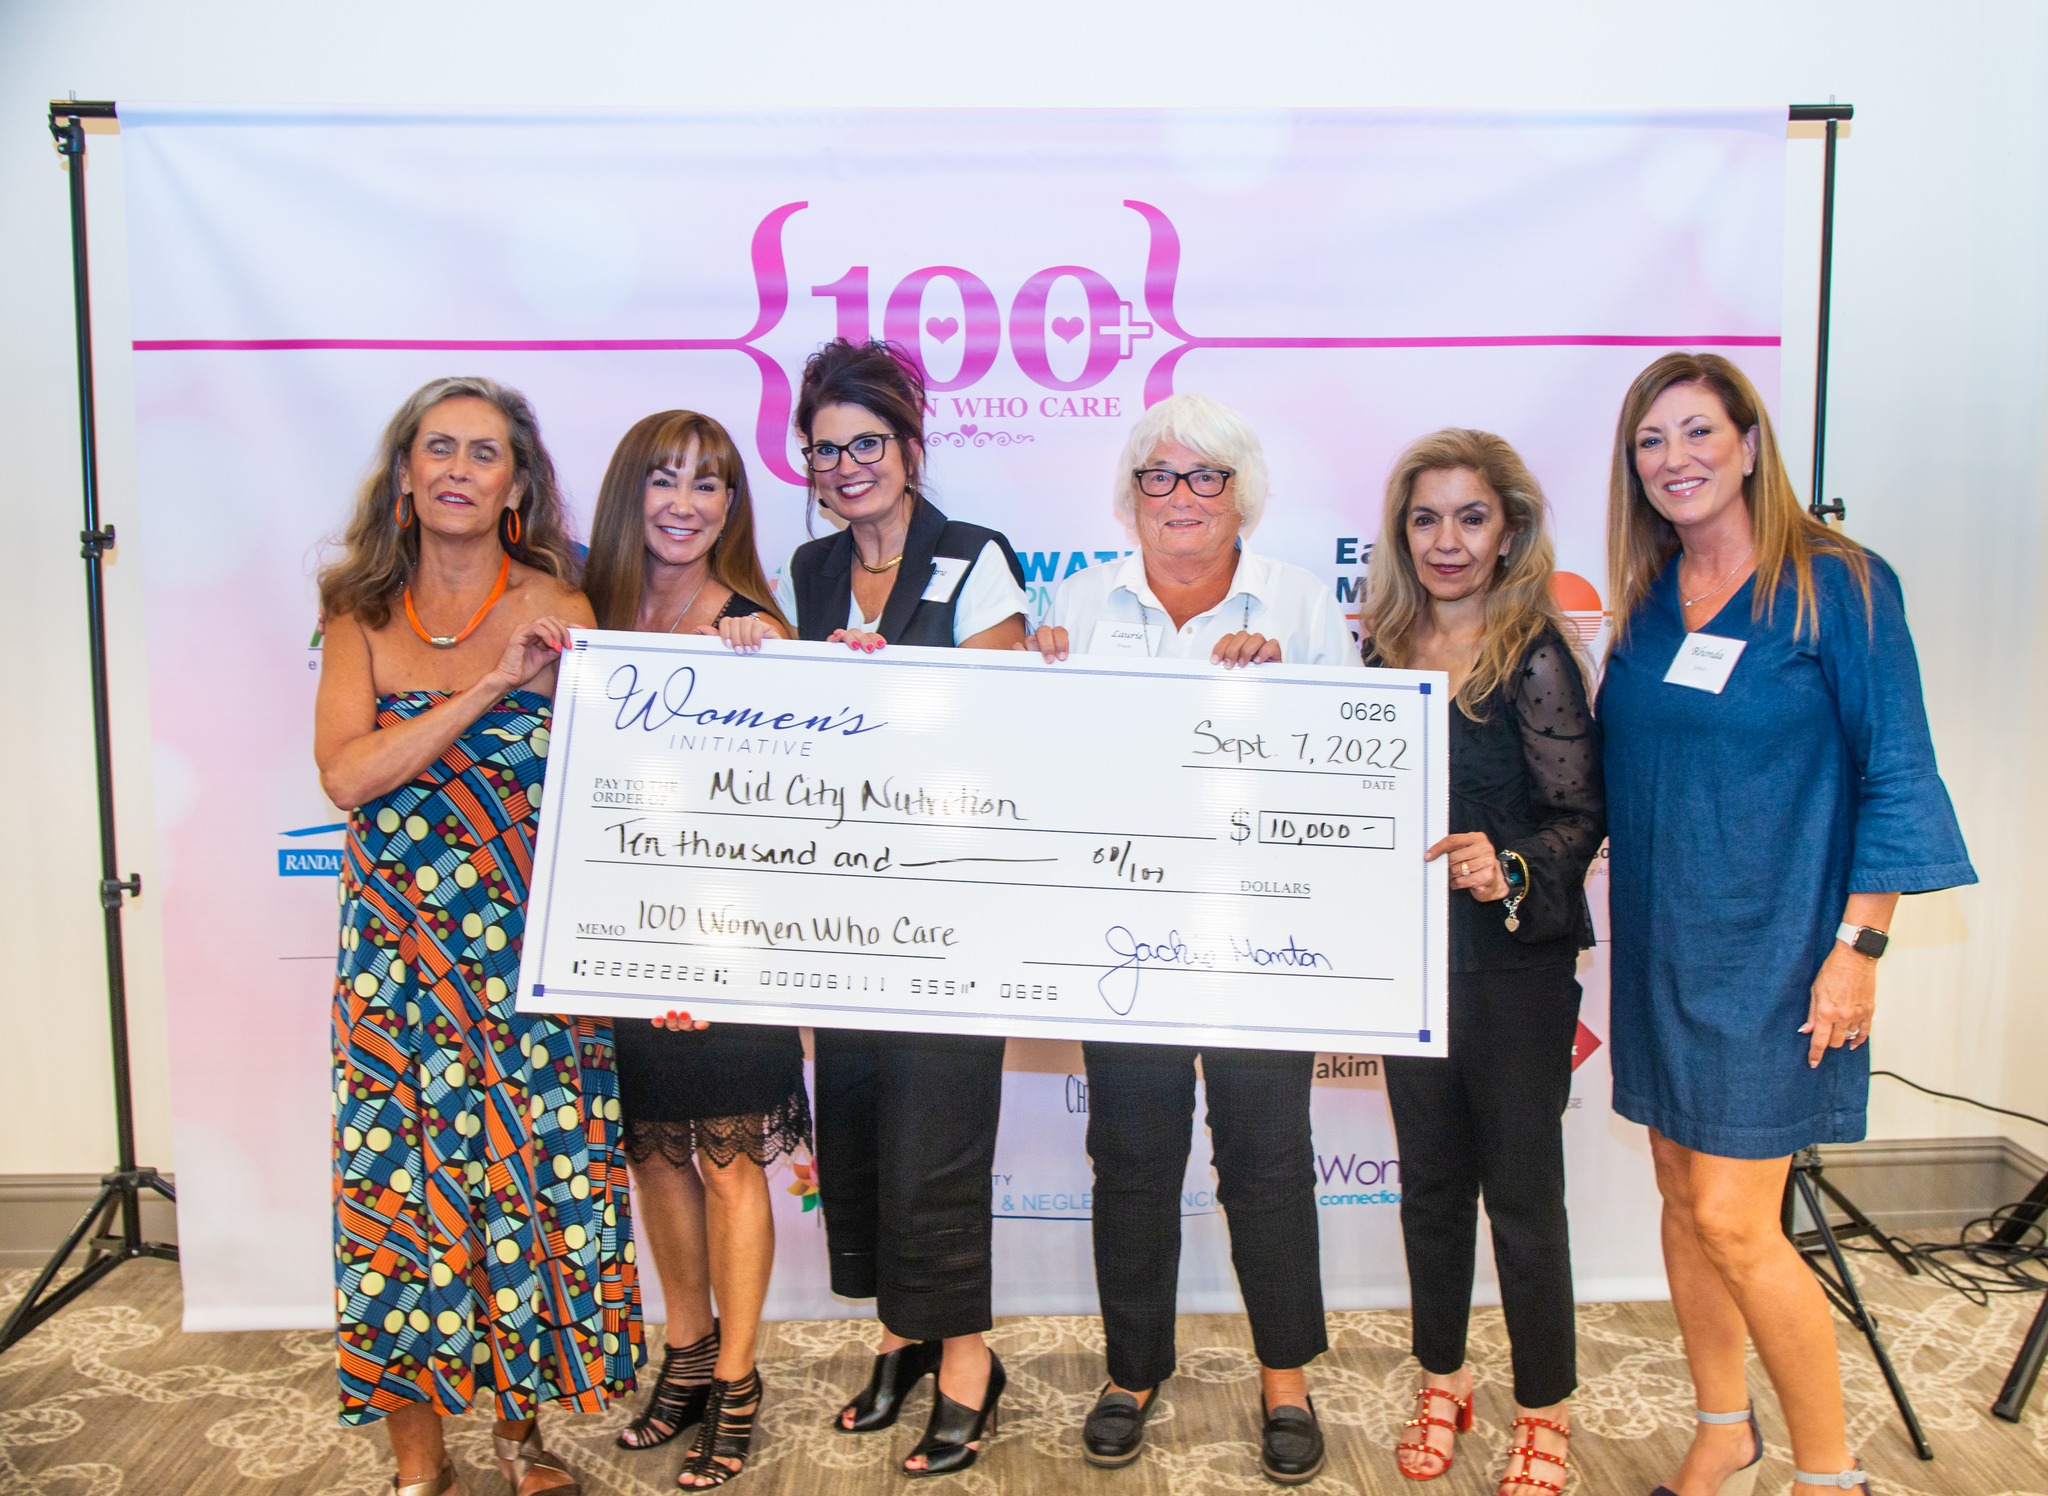 Mid City Nutrition Wins $10,000 Grant from Women’s Initiative